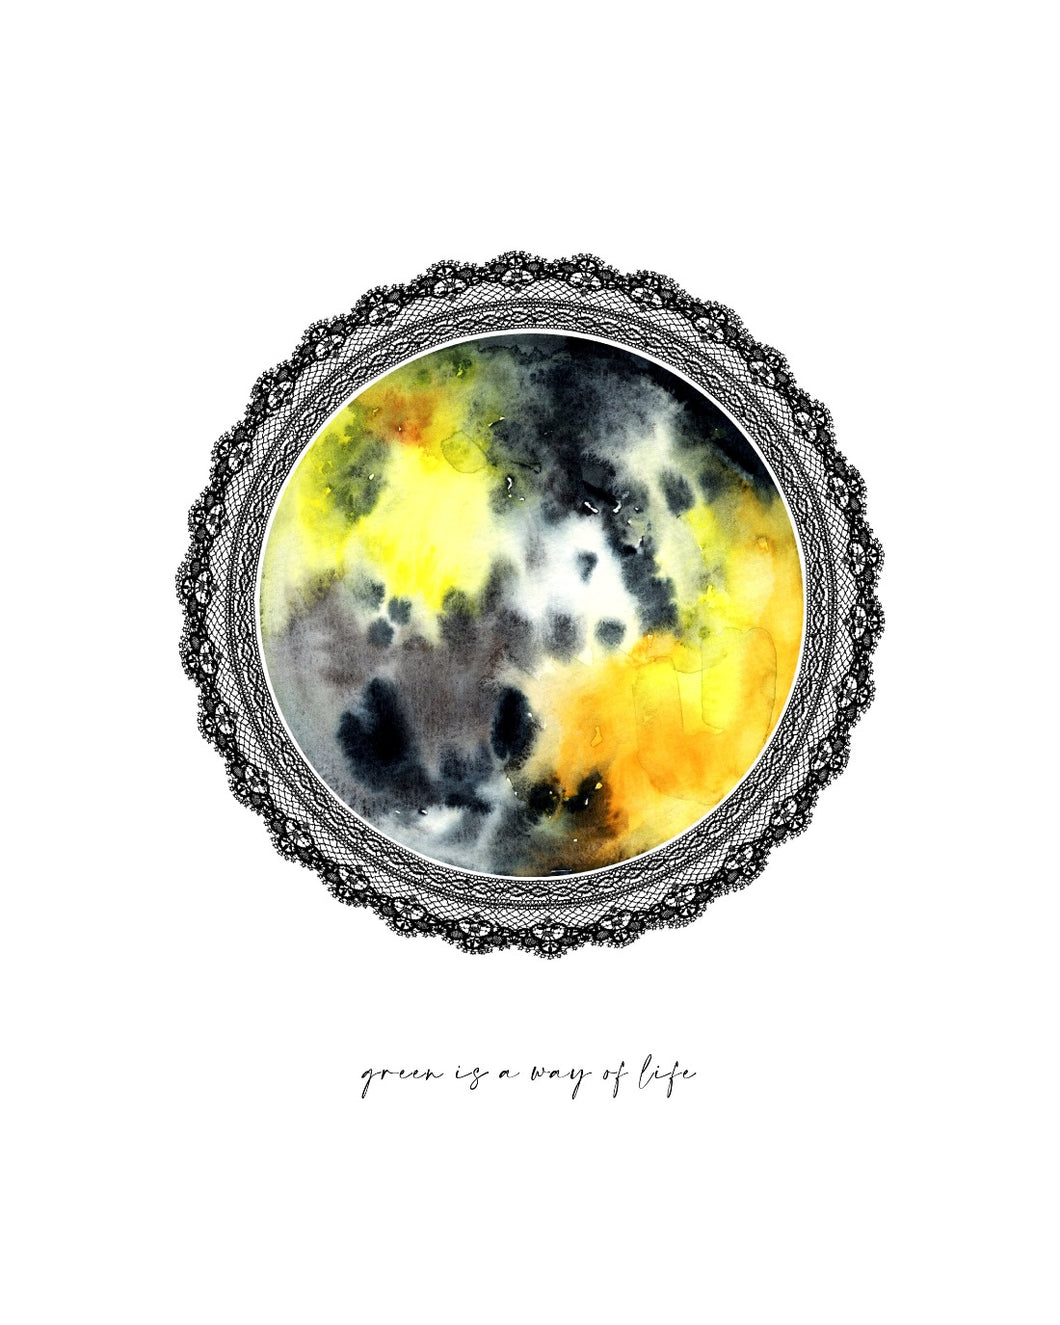 Eco-Friendly Abstract Colorful Planet Prints at Jellyque | Represents Reusable Living Through Enchanting Yellow Moon | Black & Yellow Colors For Energy & Confidence | Sophisticated Vibe | Reusable Material: Black Lace Collage Design By Graphic | Instant Download | Sustainable Living Gift Ideas & Well-Being